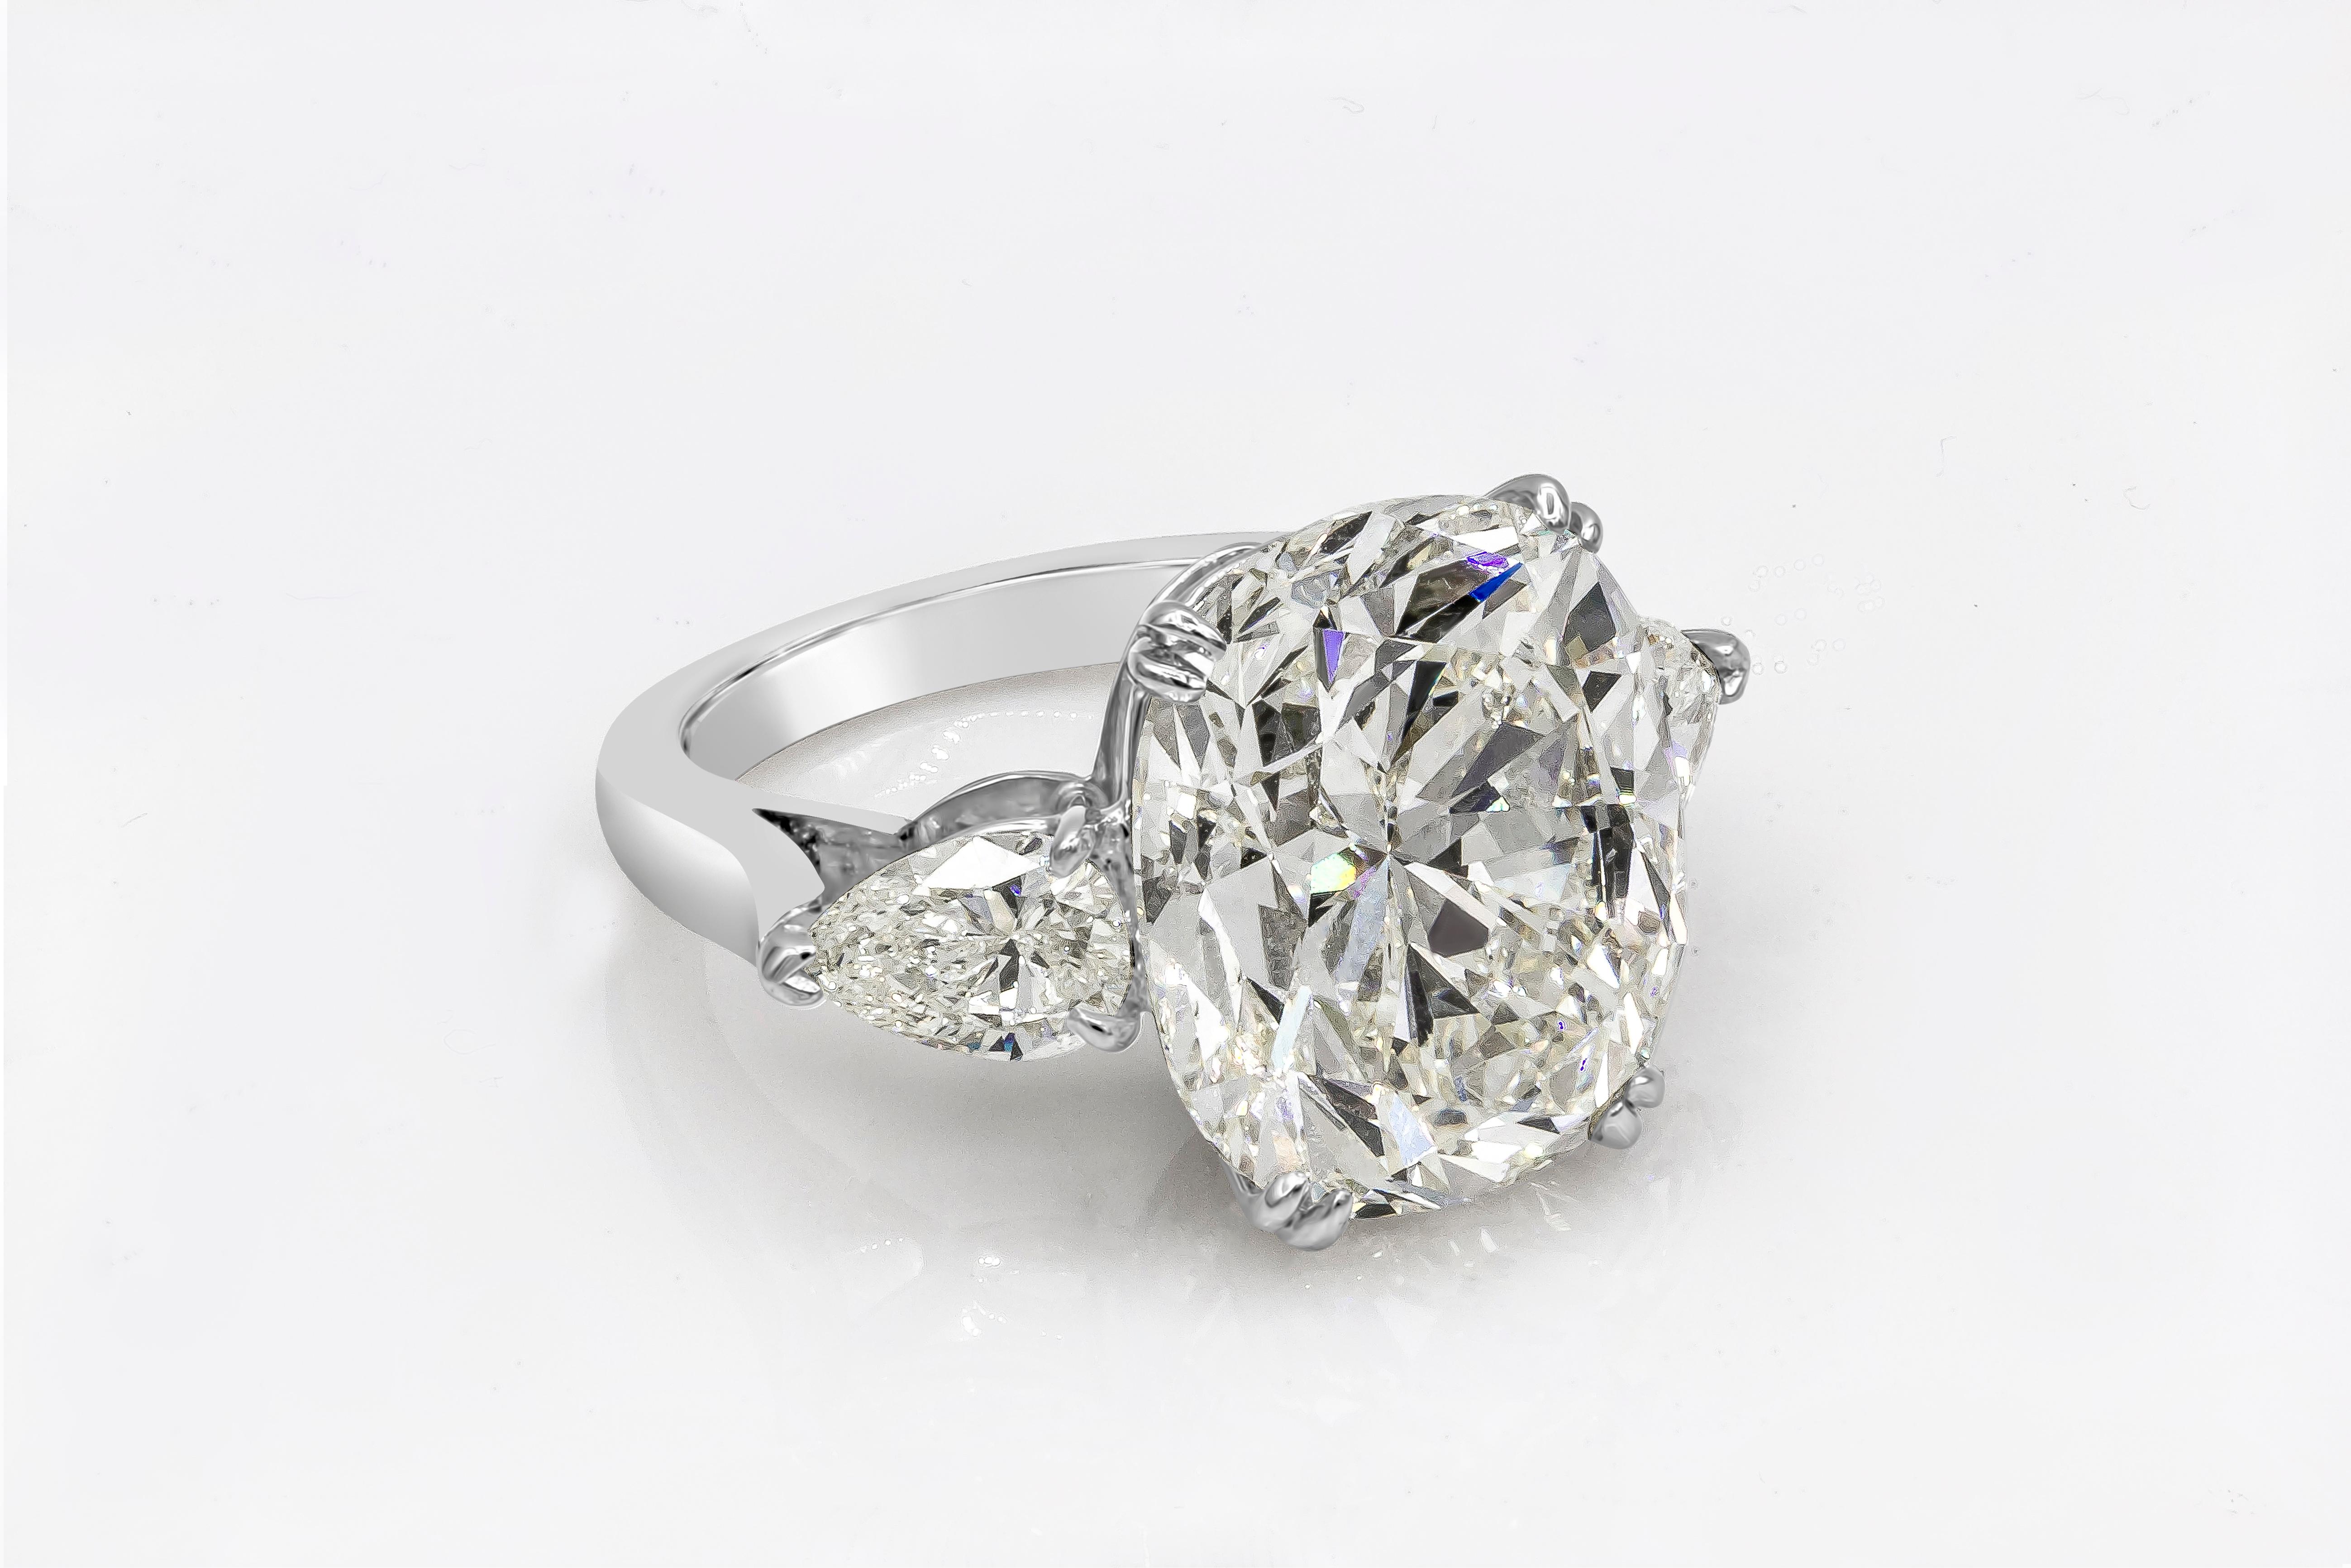 Roman Malakov GIA Certified 13.23 Carat Cushion Cut Diamond Three-Stone Ring In New Condition For Sale In New York, NY